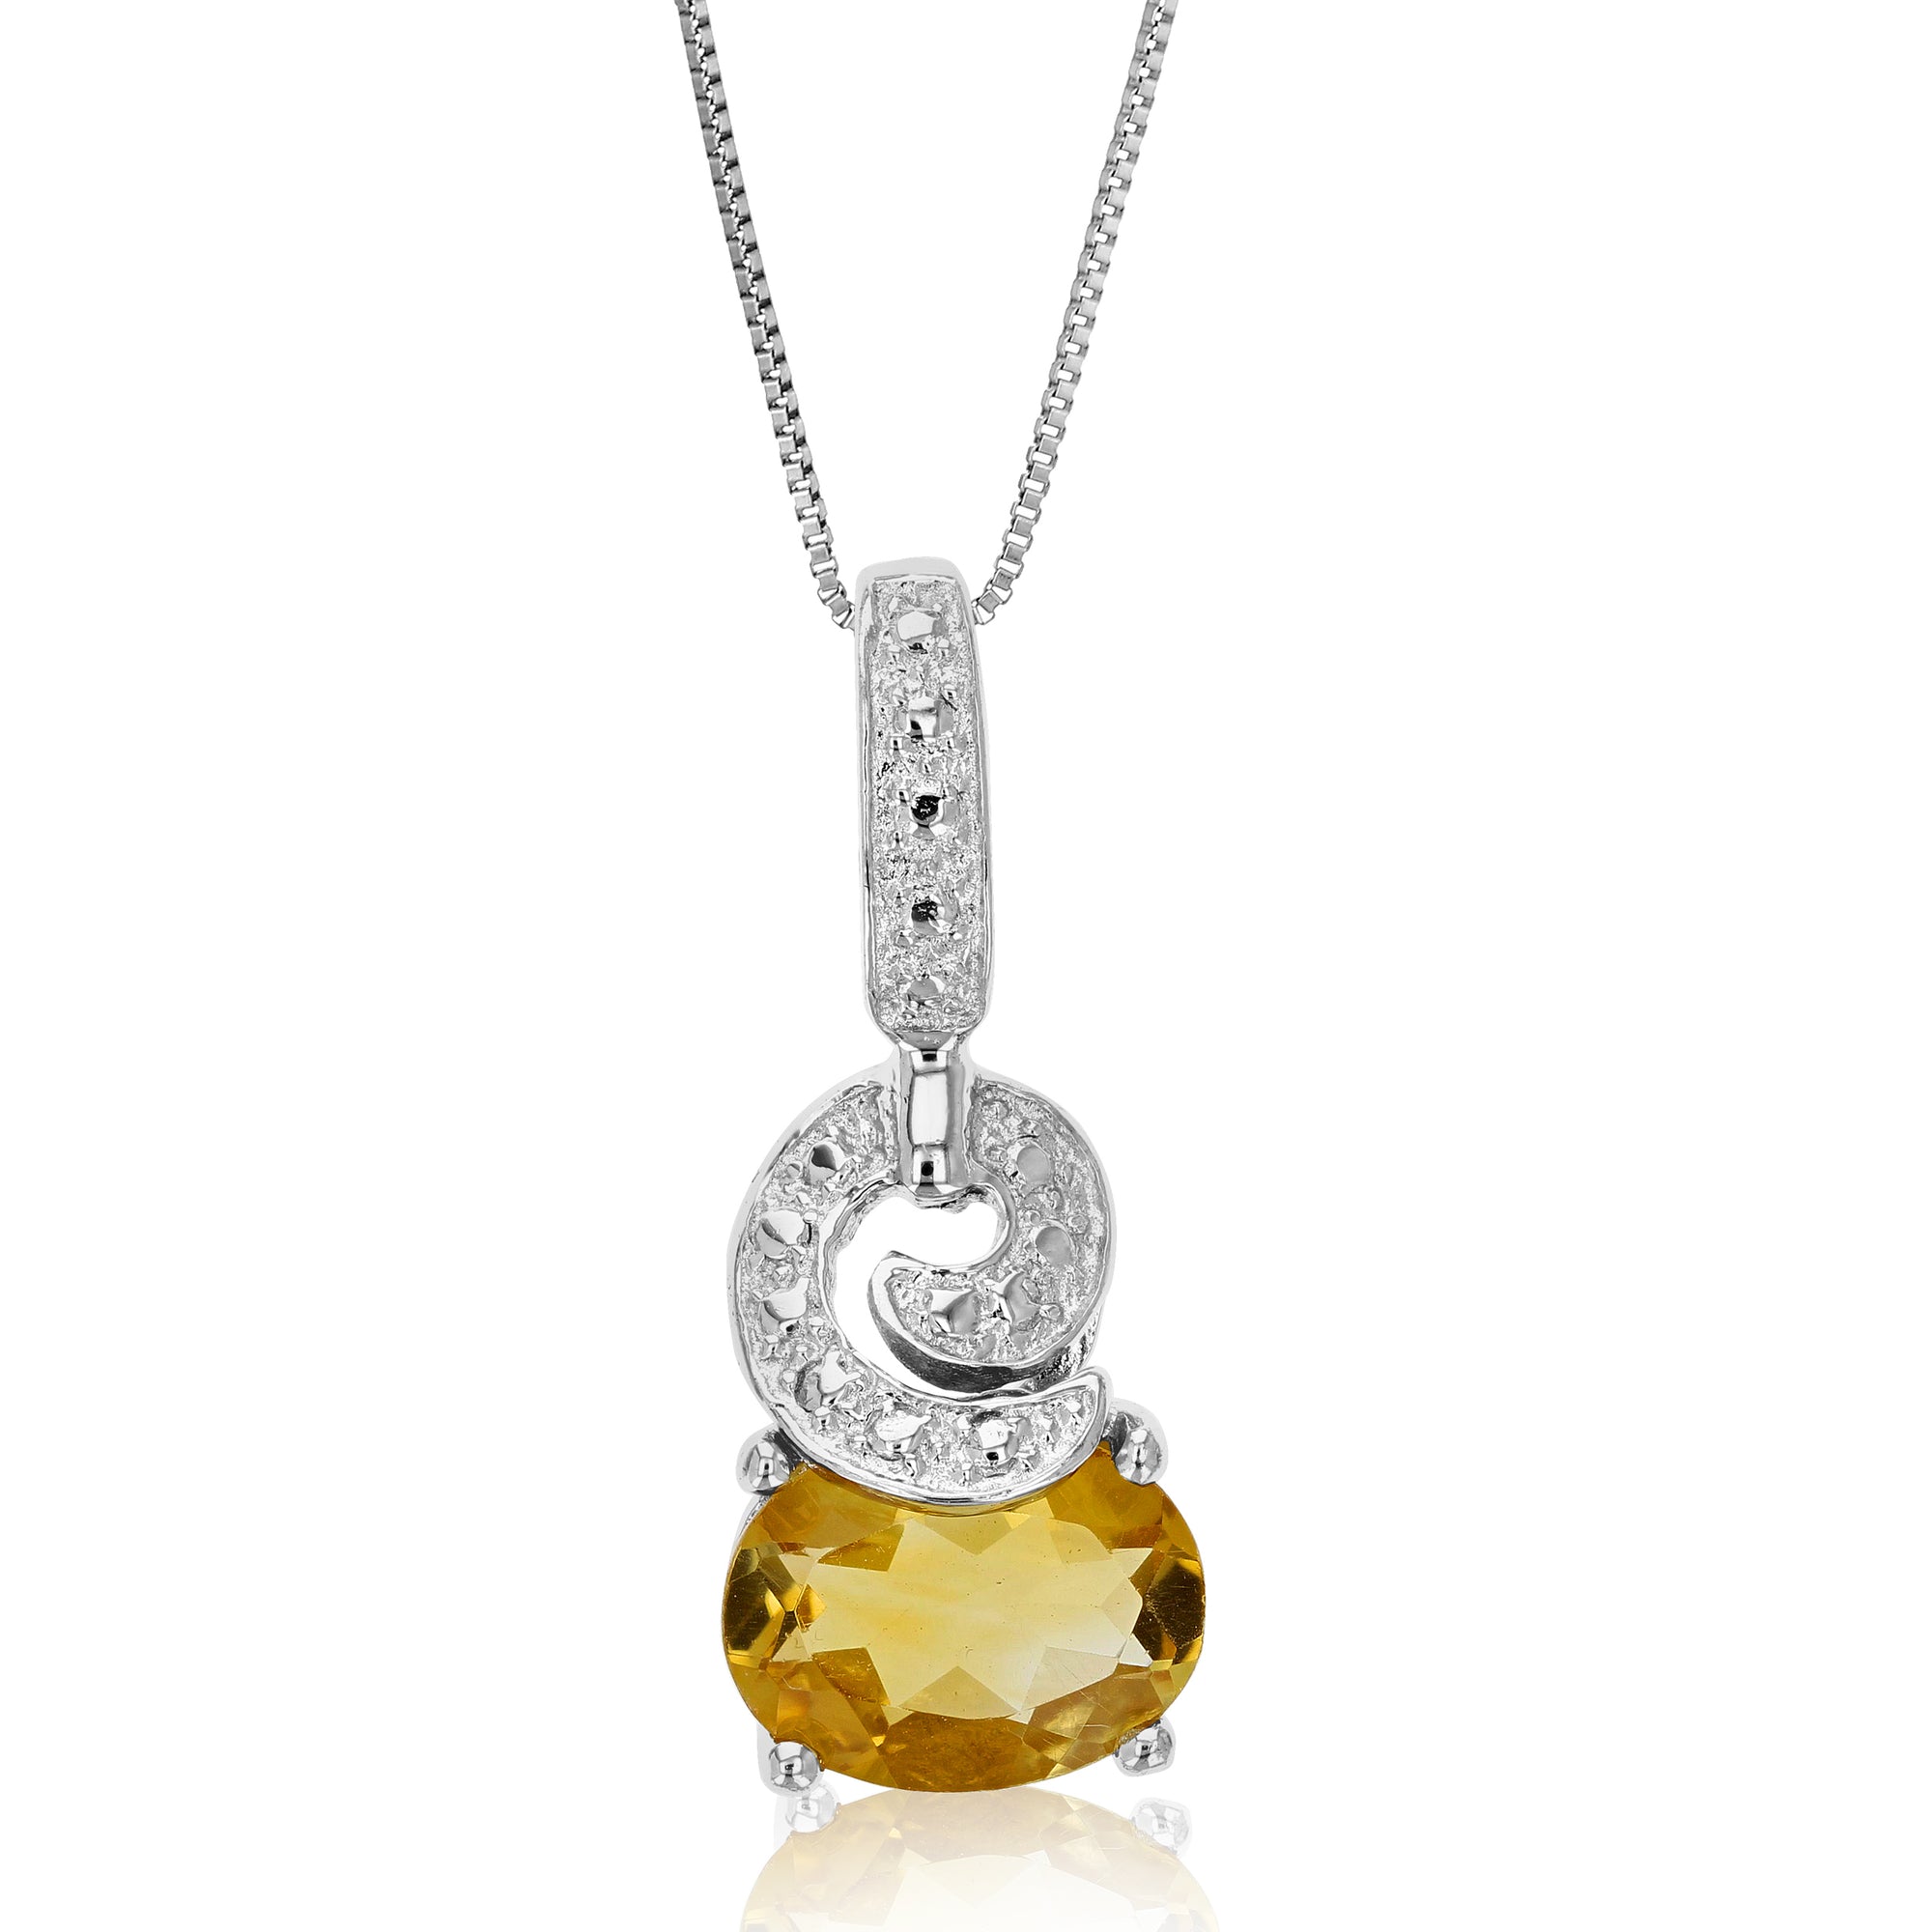 1 cttw Pendant Necklace, Citrine Oval Pendant Necklace for Women in .925 Sterling Silver with Rhodium, 18 Inch Chain, Prong Setting